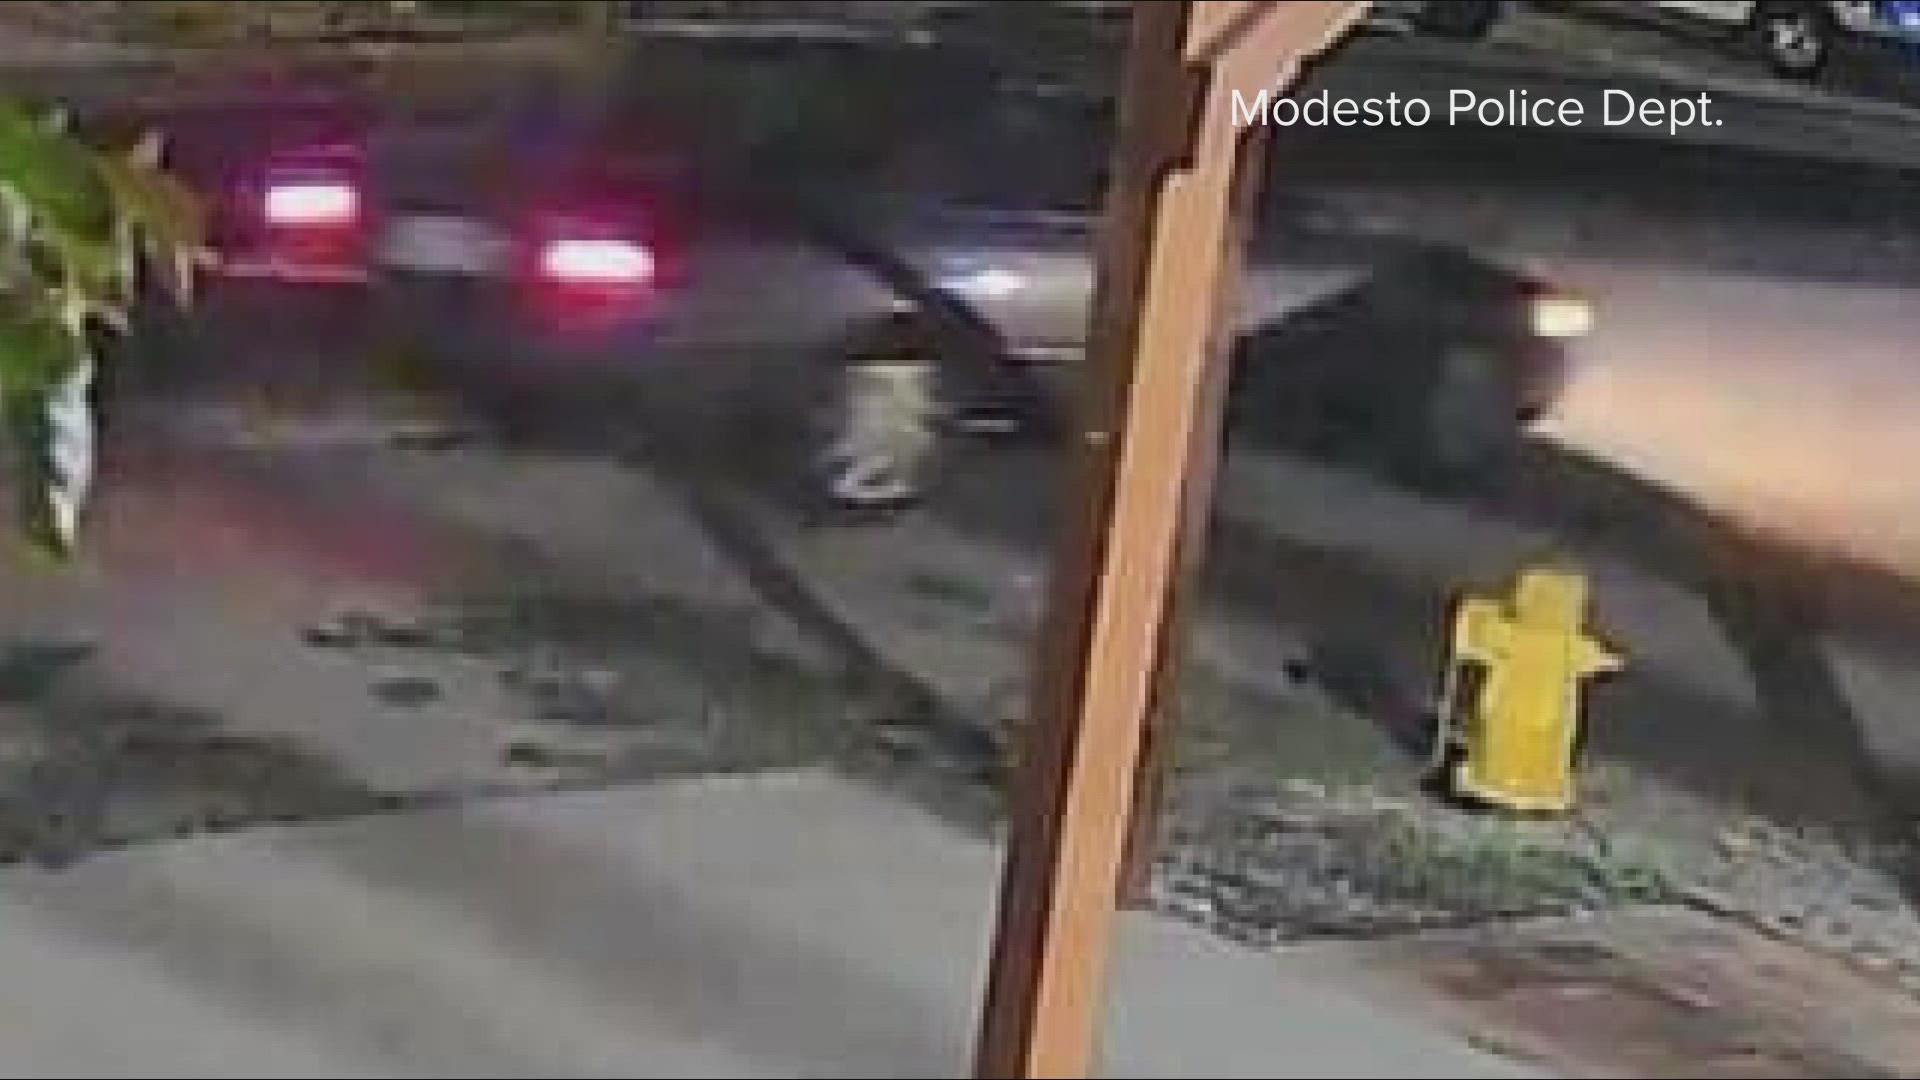 Police are still looking for answers after a DoorDash driver was killed in Modesto.